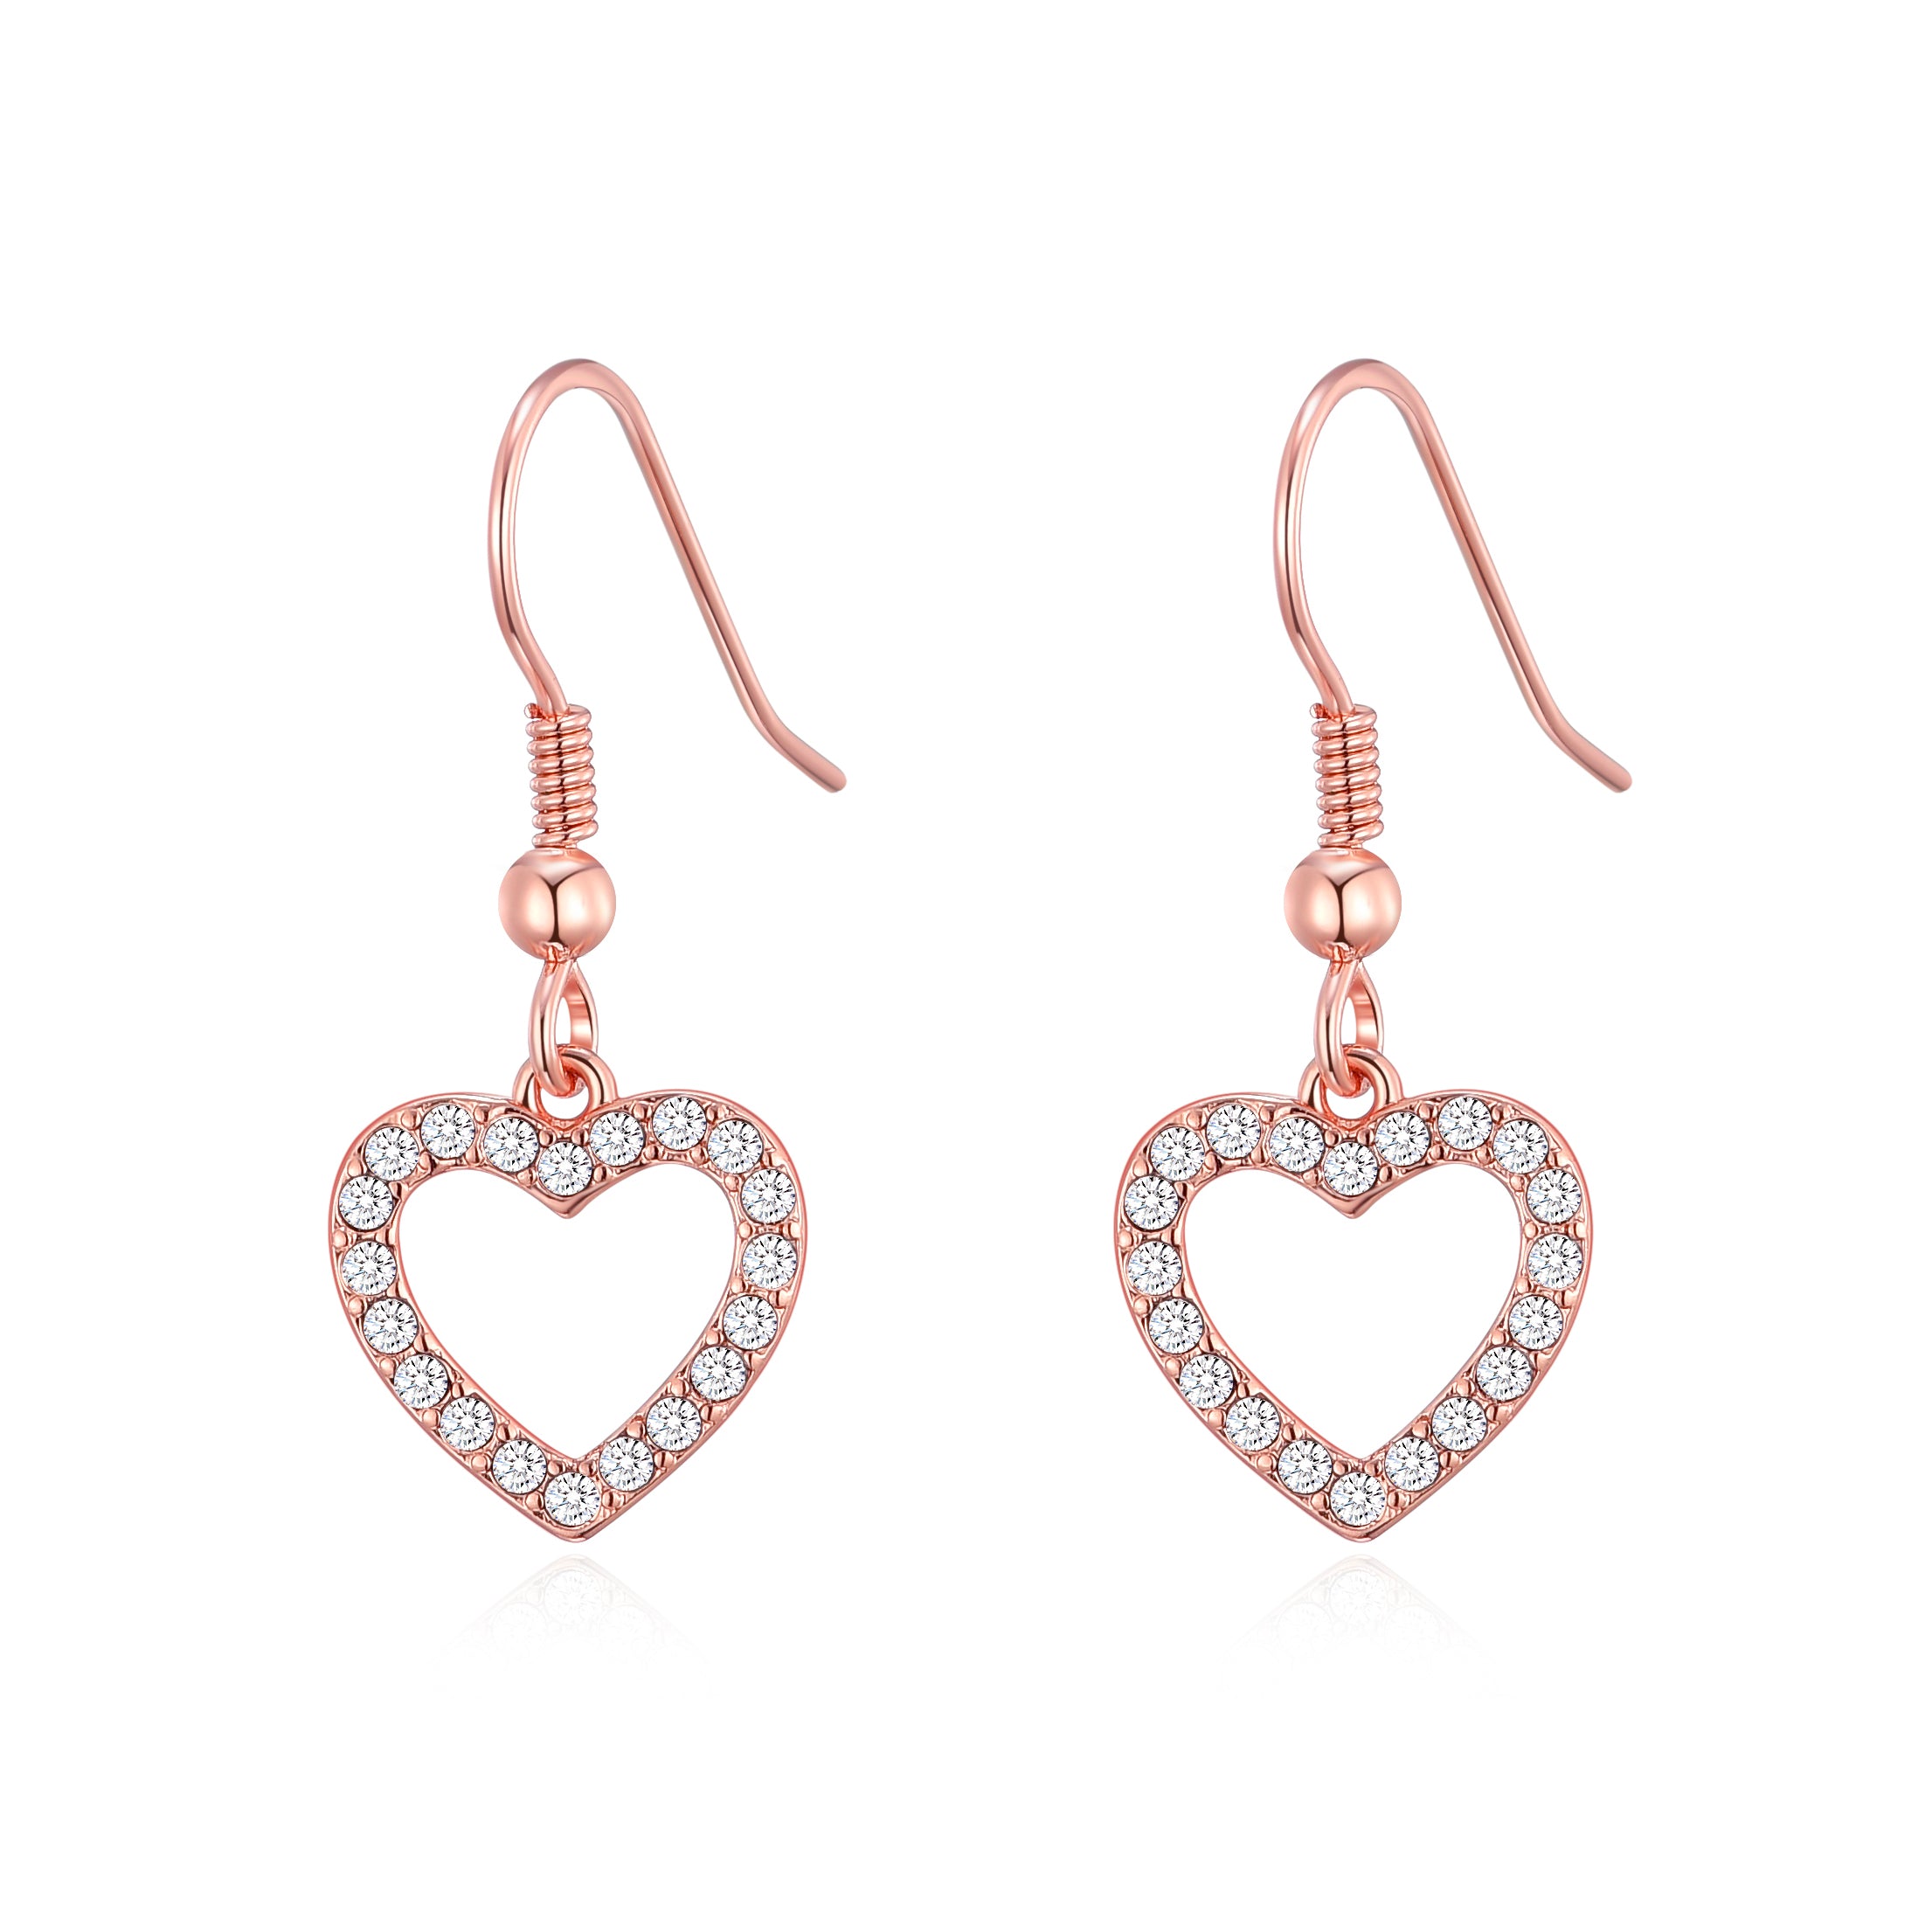 Rose Gold Plated Open Heart Drop Earrings Created with Zircondia® Crystals by Philip Jones Jewellery